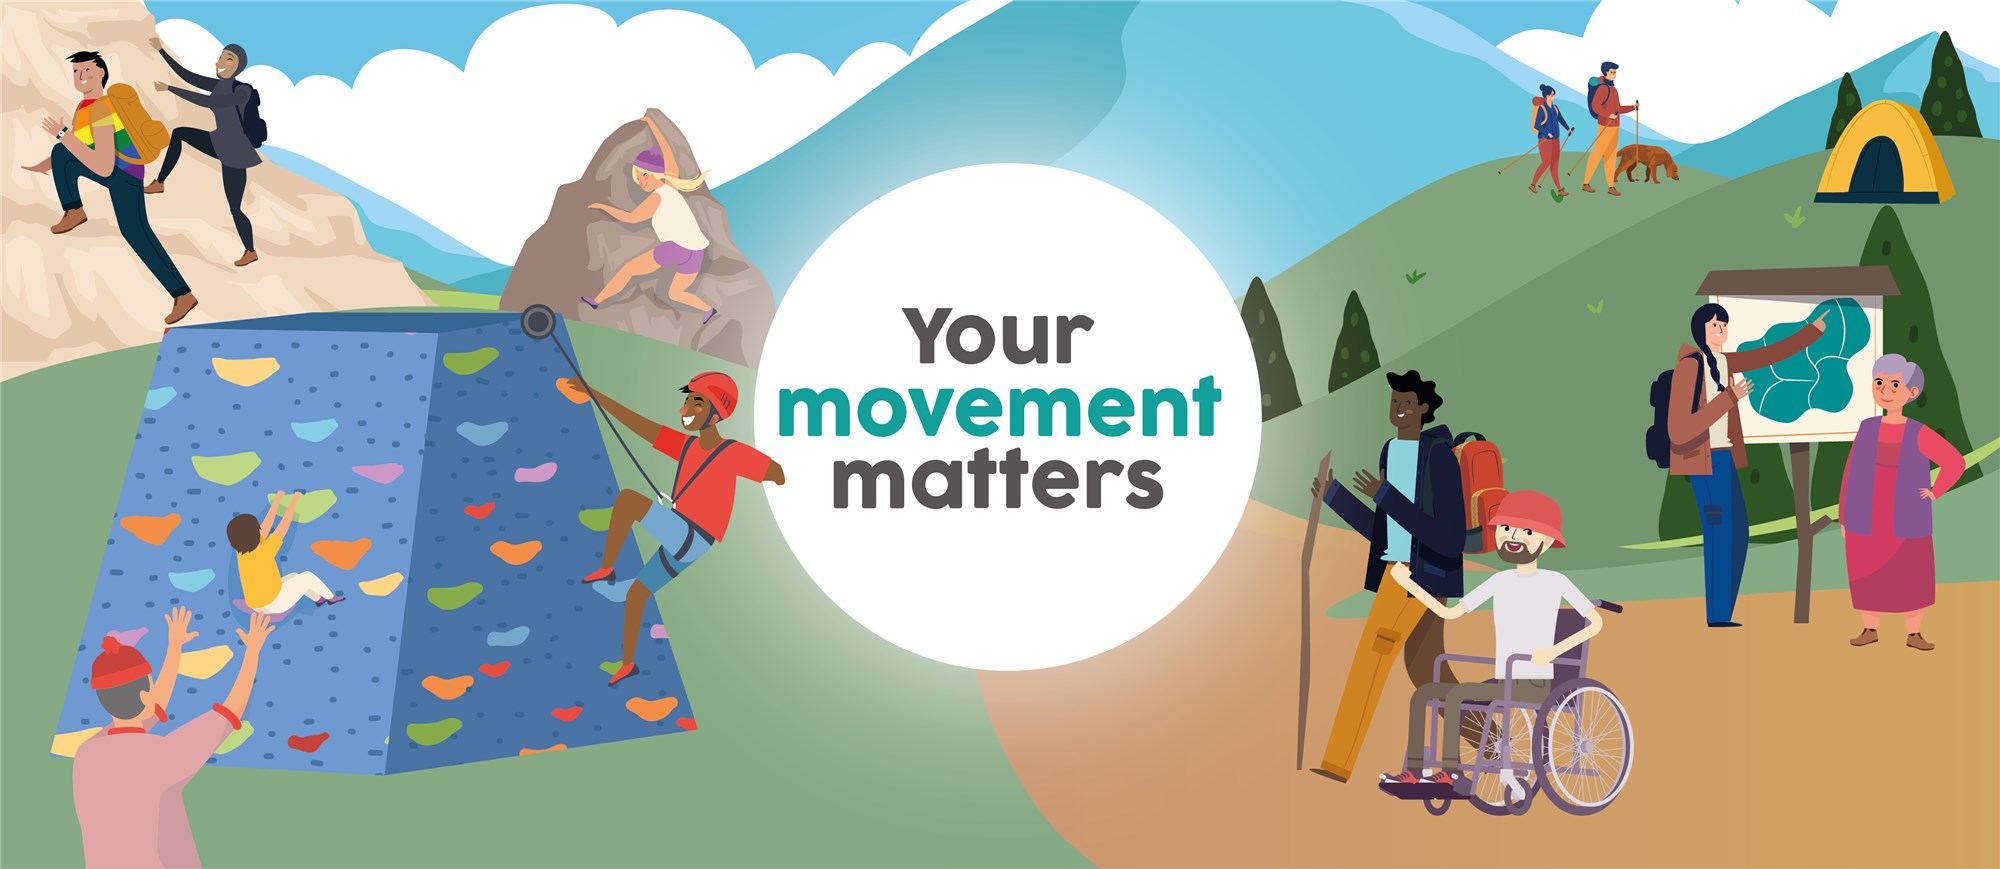 Your movement matters banner